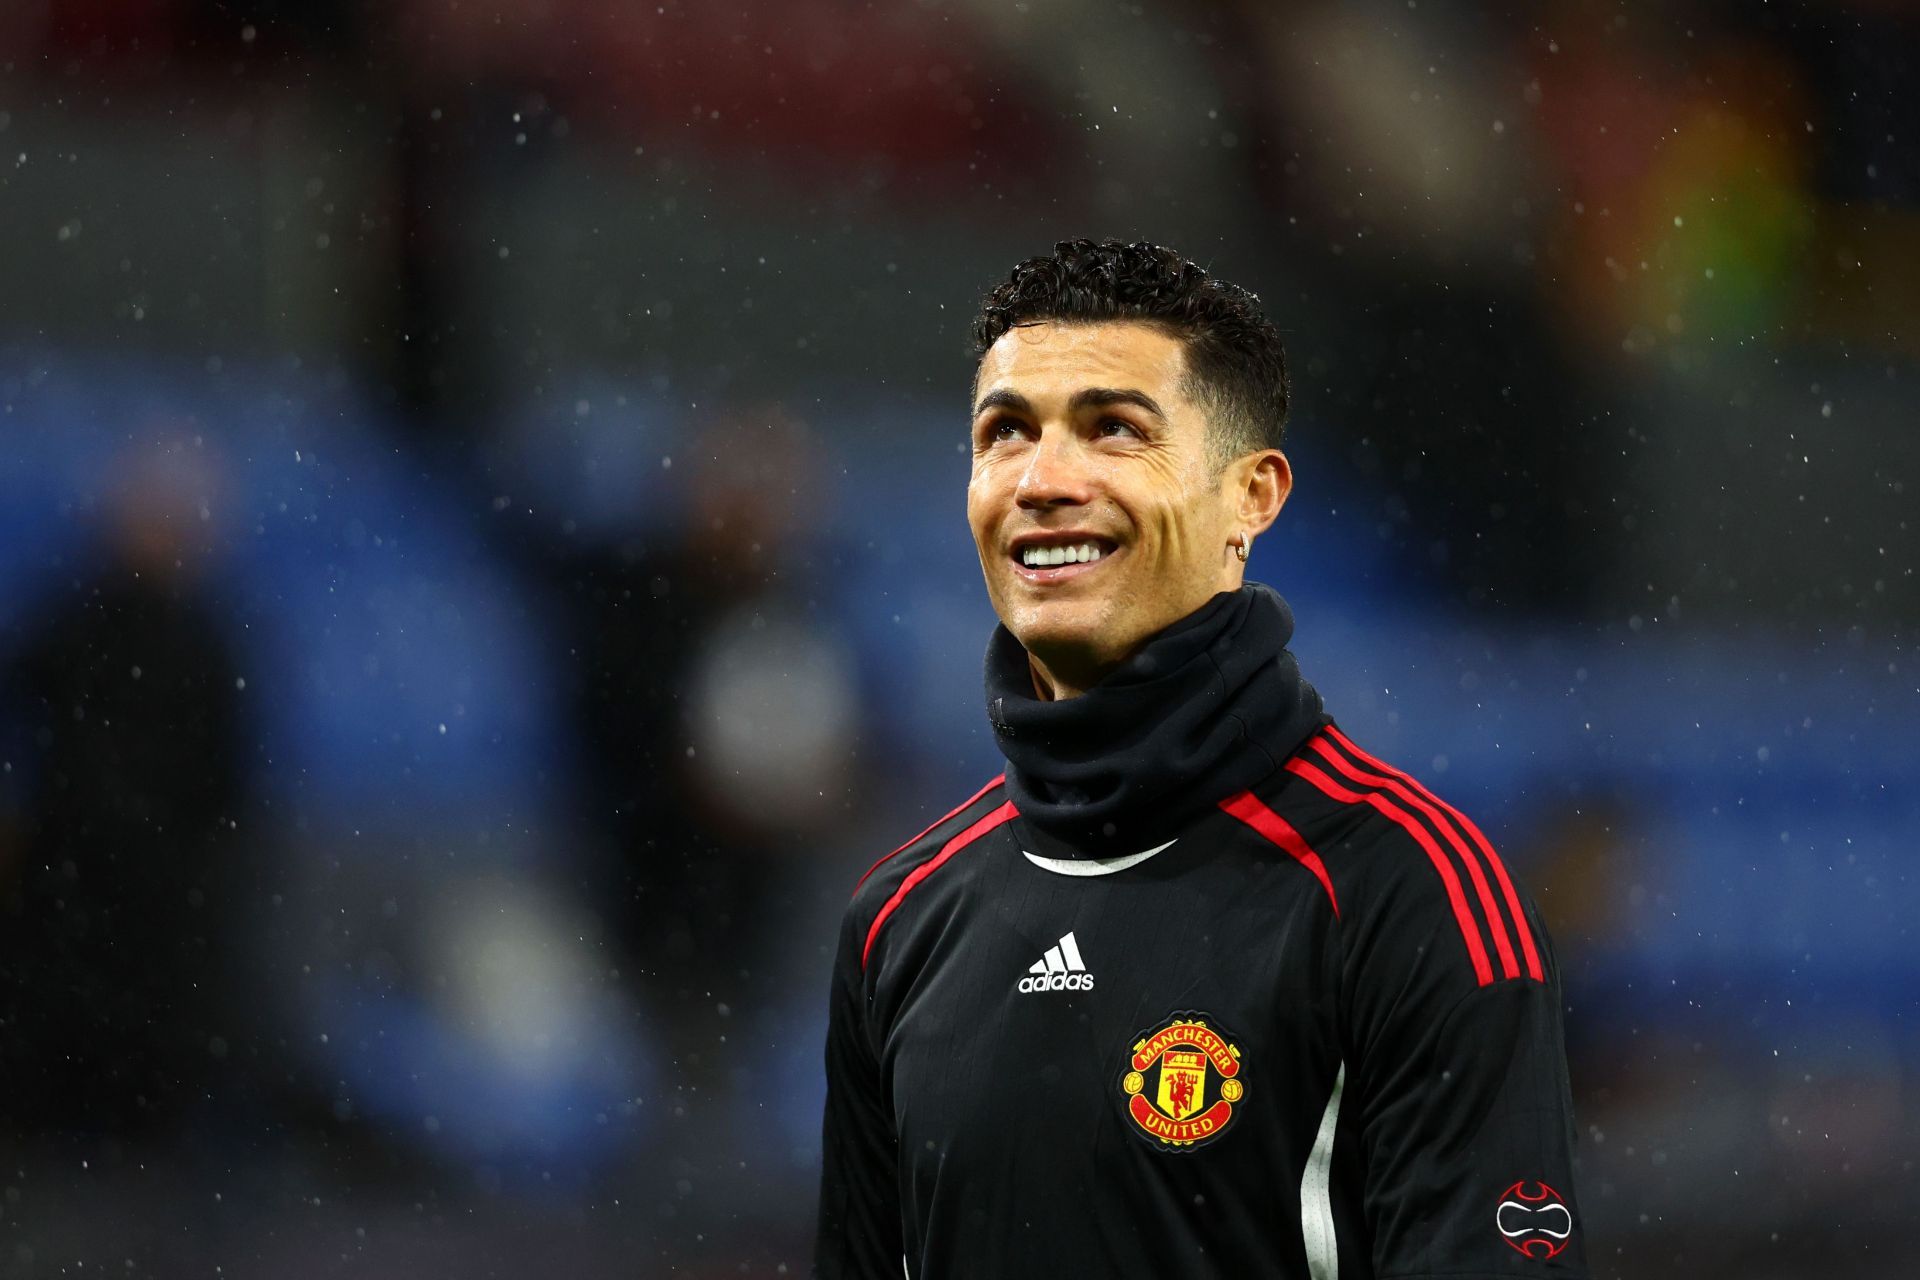 Cristiano Ronaldo will lead the attack tonight for Man United (Photo by Clive Brunskill/Getty Images)